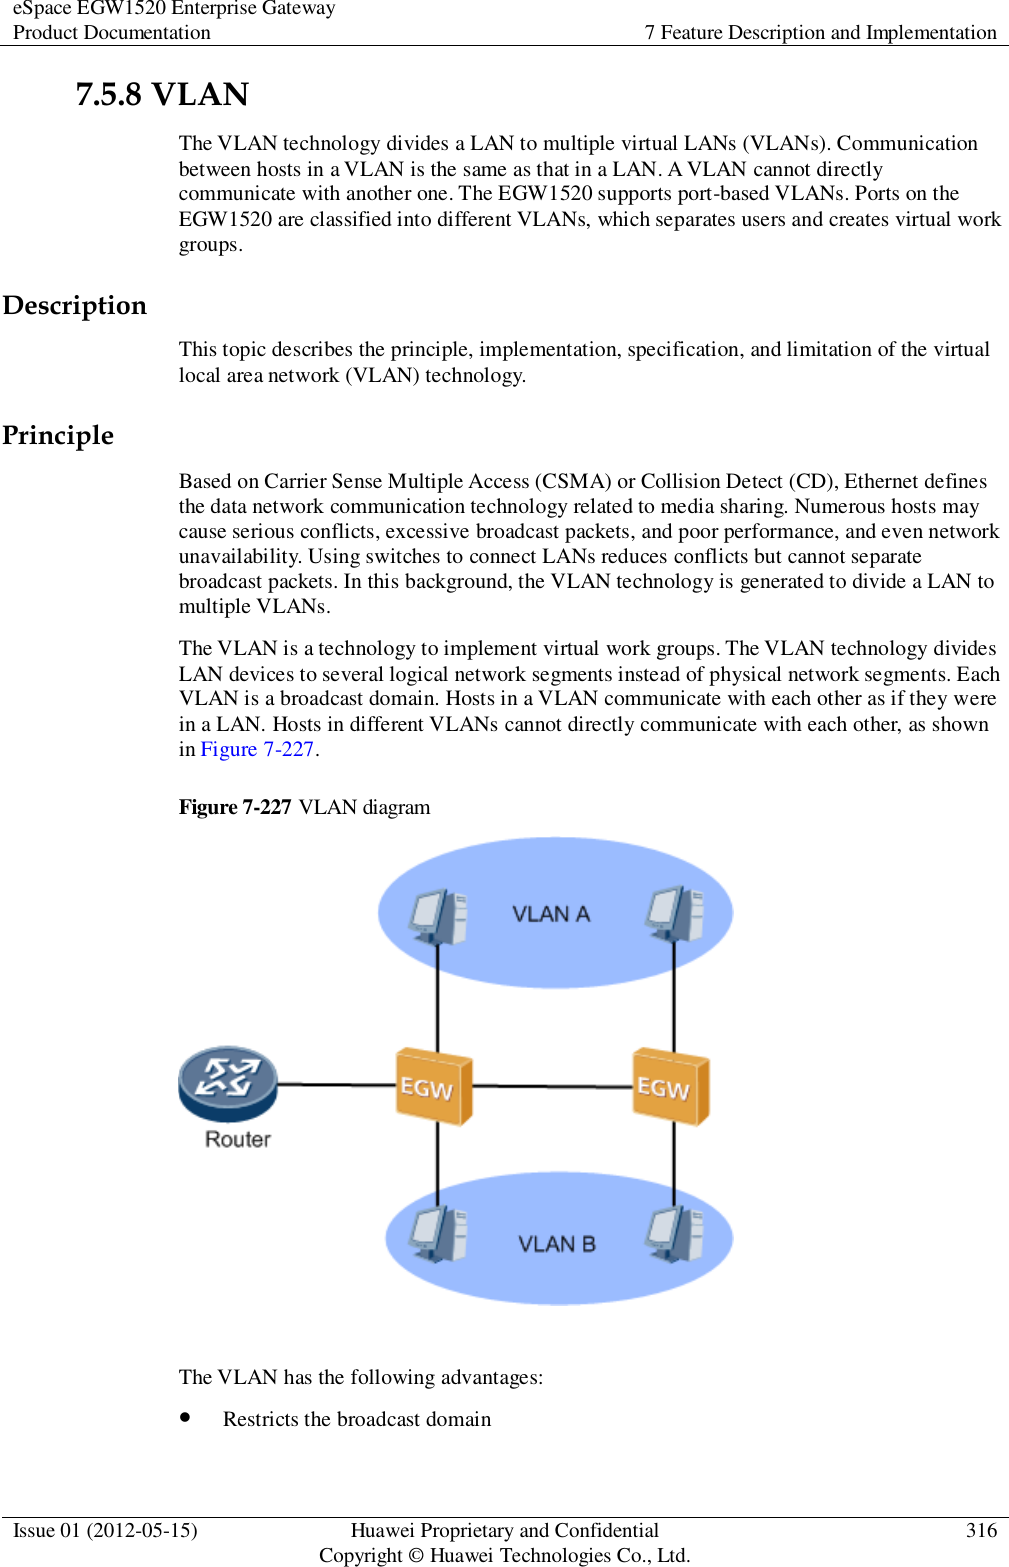 eSpace EGW1520 Enterprise Gateway Product Documentation 7 Feature Description and Implementation  Issue 01 (2012-05-15) Huawei Proprietary and Confidential                                     Copyright © Huawei Technologies Co., Ltd. 316  7.5.8 VLAN The VLAN technology divides a LAN to multiple virtual LANs (VLANs). Communication between hosts in a VLAN is the same as that in a LAN. A VLAN cannot directly communicate with another one. The EGW1520 supports port-based VLANs. Ports on the EGW1520 are classified into different VLANs, which separates users and creates virtual work groups. Description This topic describes the principle, implementation, specification, and limitation of the virtual local area network (VLAN) technology. Principle Based on Carrier Sense Multiple Access (CSMA) or Collision Detect (CD), Ethernet defines the data network communication technology related to media sharing. Numerous hosts may cause serious conflicts, excessive broadcast packets, and poor performance, and even network unavailability. Using switches to connect LANs reduces conflicts but cannot separate broadcast packets. In this background, the VLAN technology is generated to divide a LAN to multiple VLANs. The VLAN is a technology to implement virtual work groups. The VLAN technology divides LAN devices to several logical network segments instead of physical network segments. Each VLAN is a broadcast domain. Hosts in a VLAN communicate with each other as if they were in a LAN. Hosts in different VLANs cannot directly communicate with each other, as shown in Figure 7-227. Figure 7-227 VLAN diagram   The VLAN has the following advantages:  Restricts the broadcast domain 